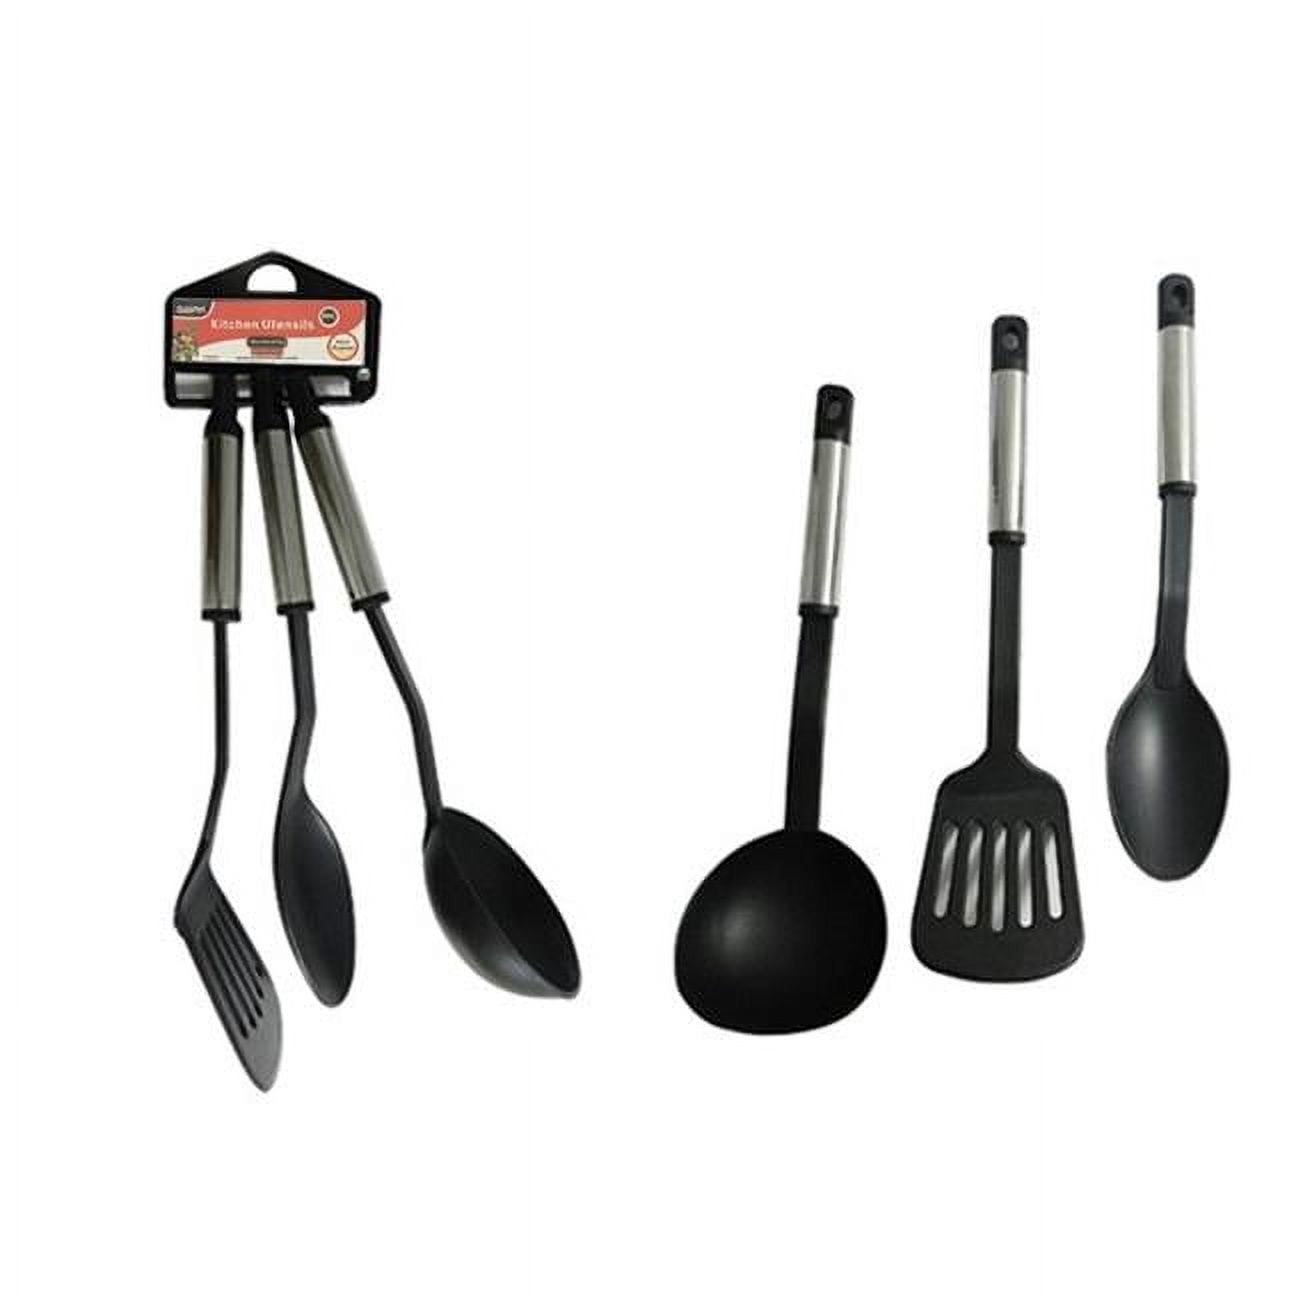 Kitchen Tools – Family of Things